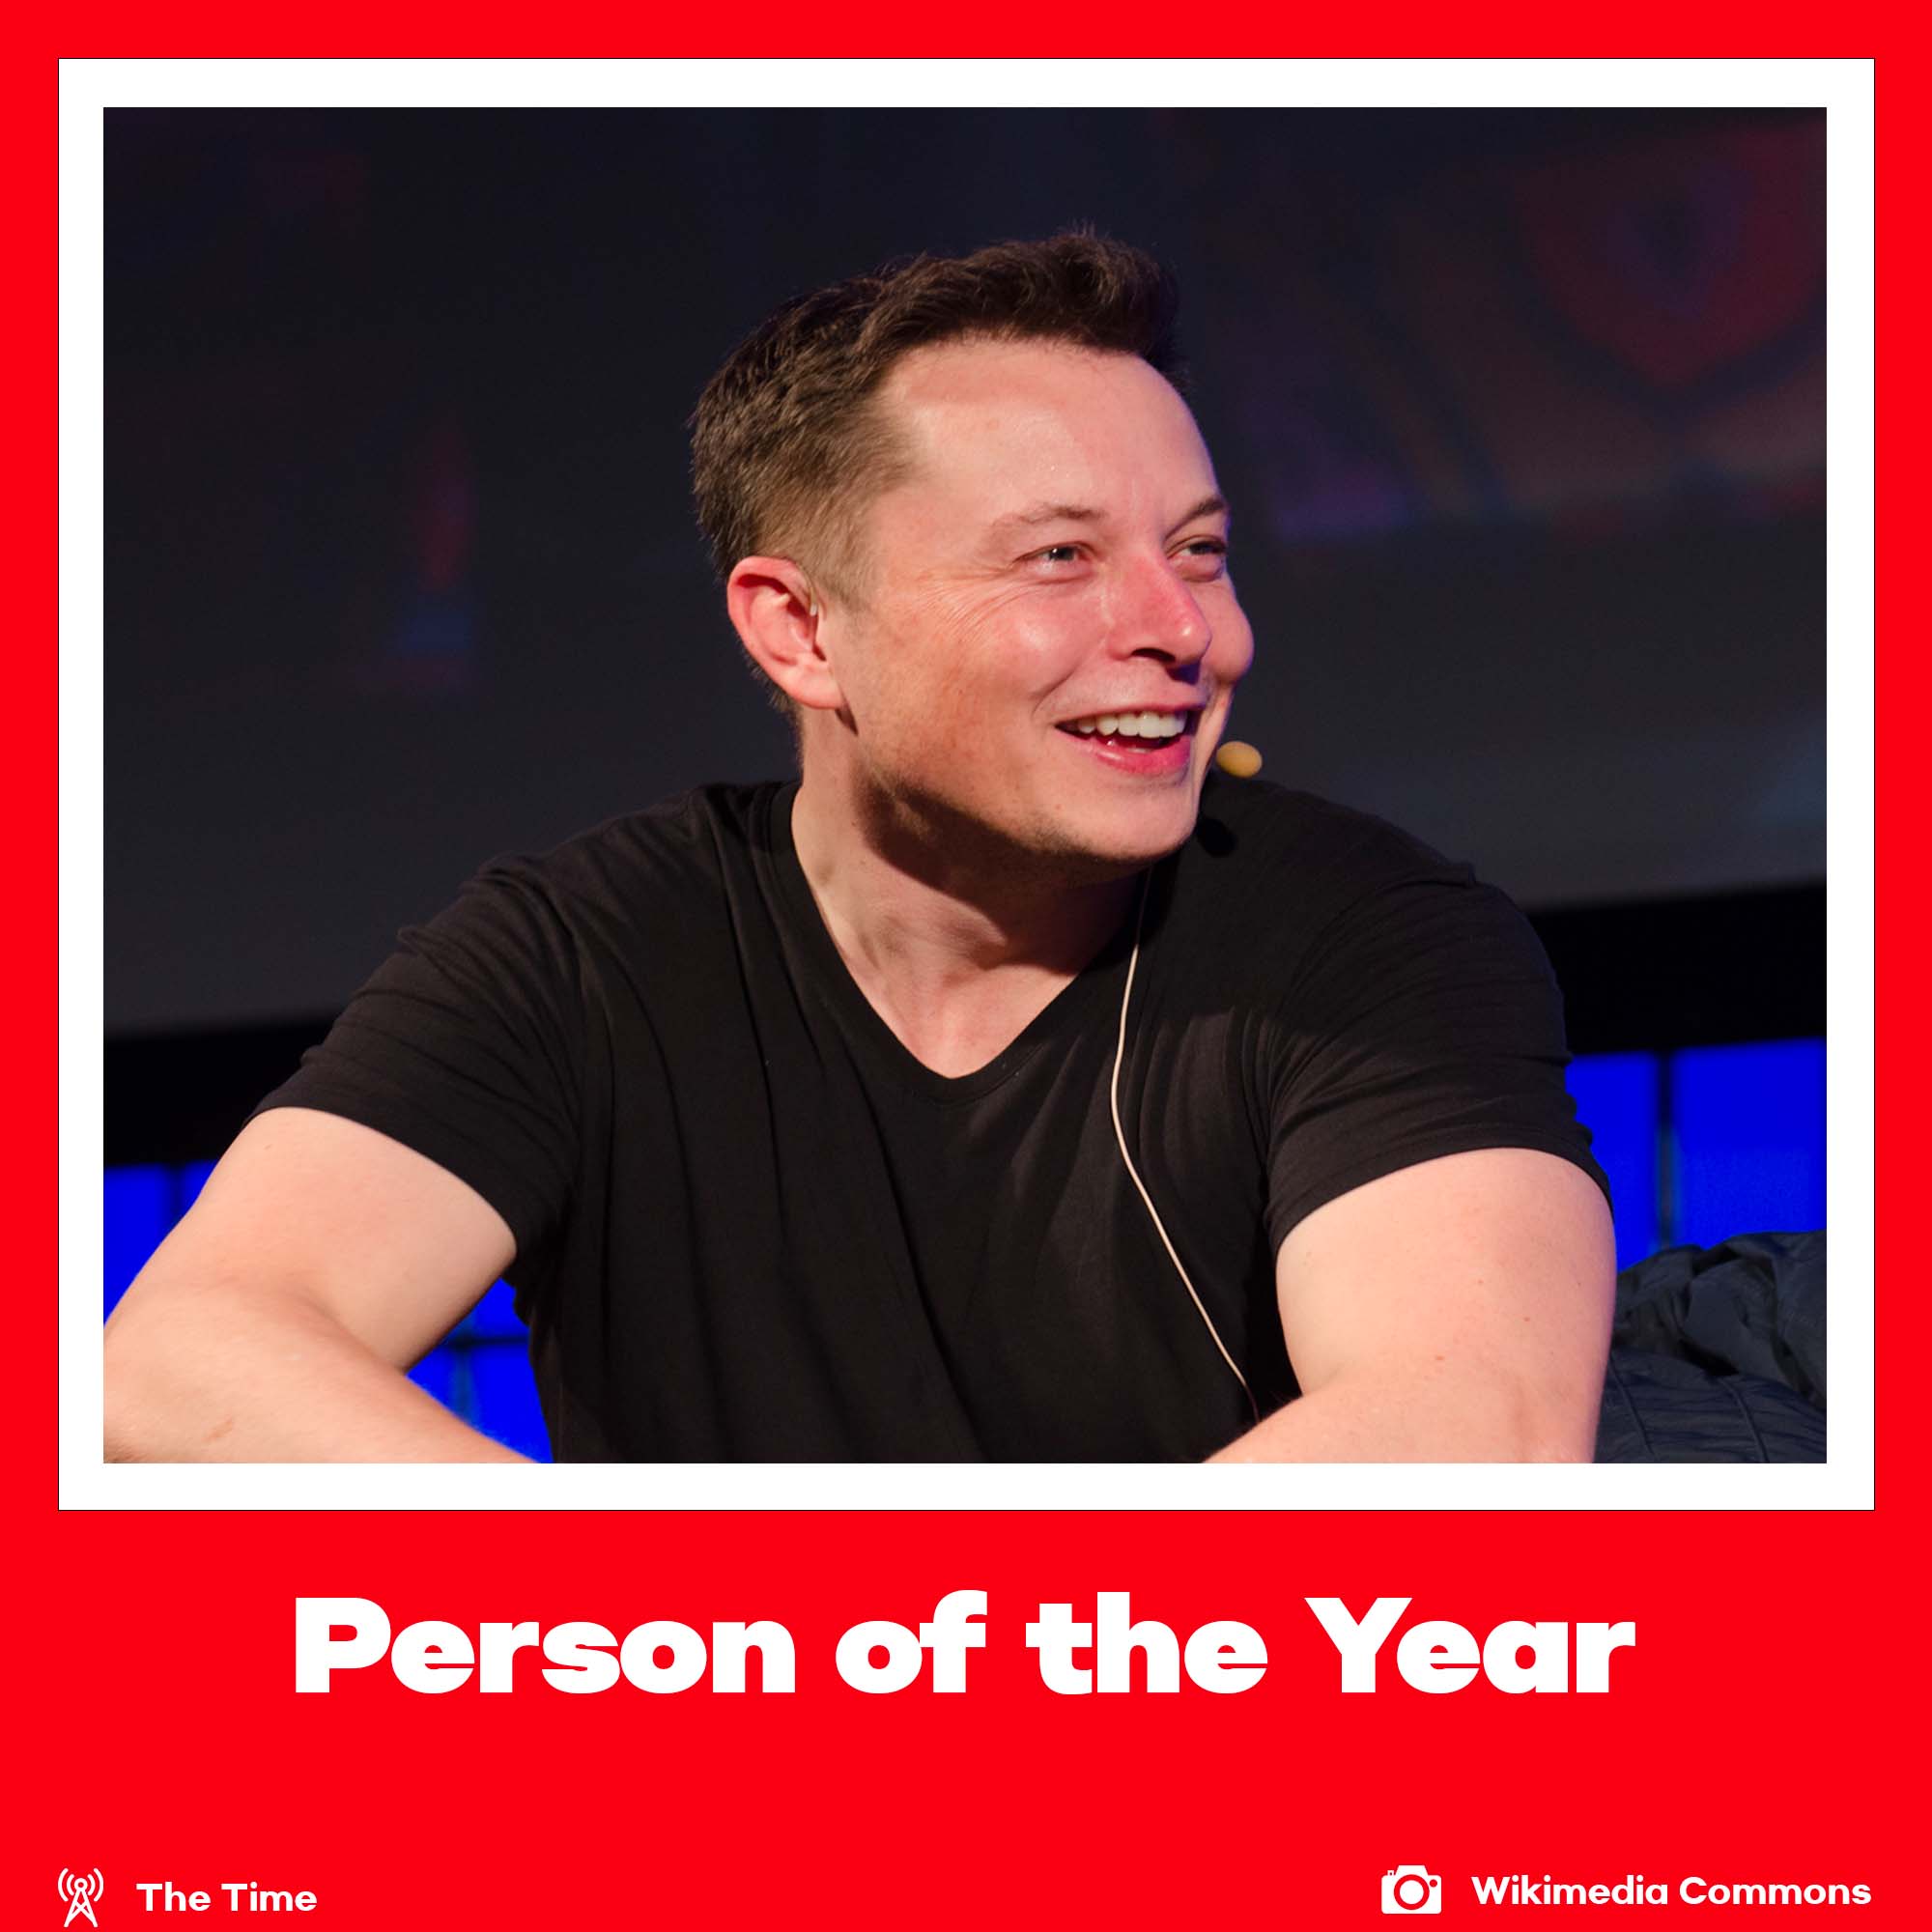 Elon Musk is Person of the Year